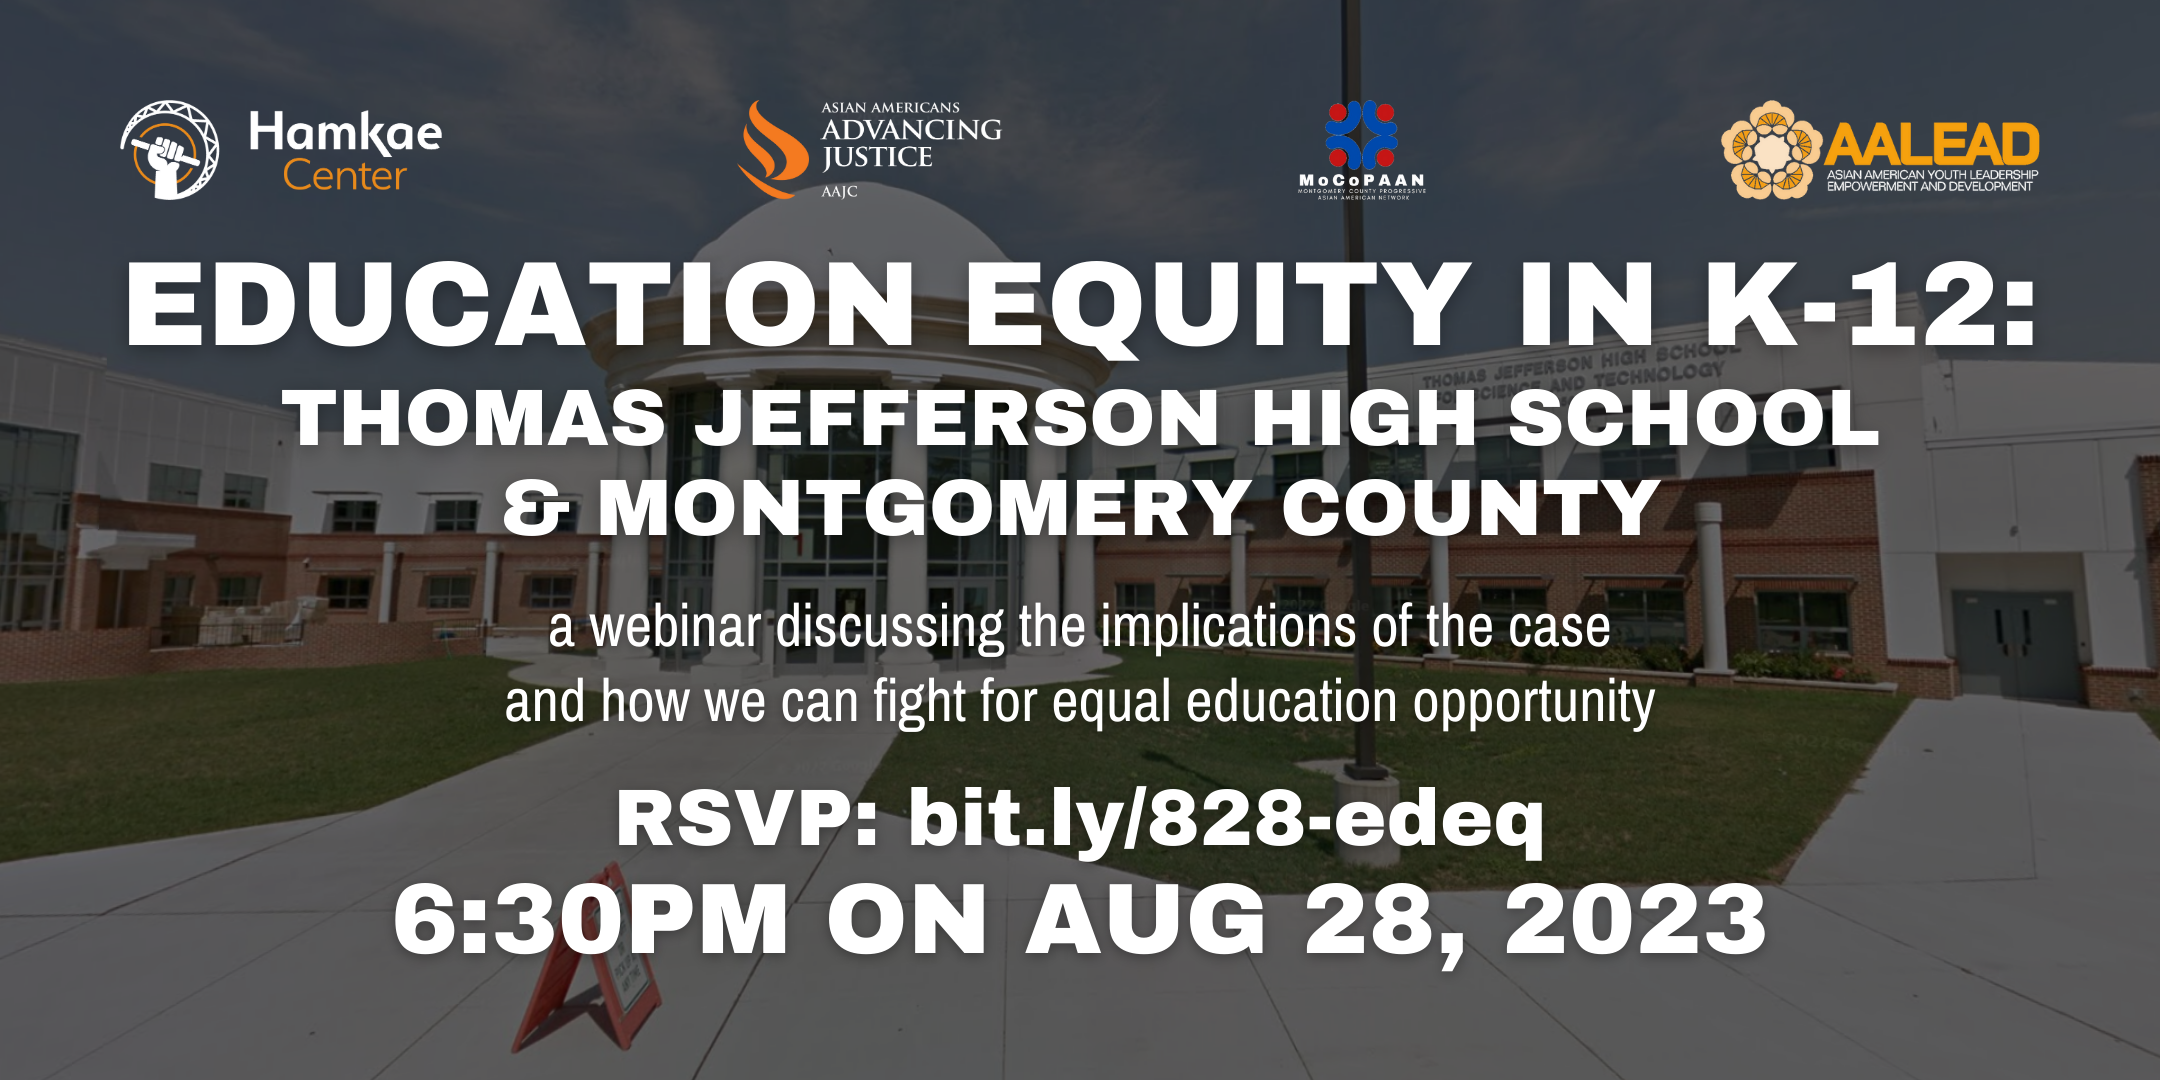 Education Equity in K-12: Thomas Jefferson High School & Montgomery County A webinar discussing the implications of the case and how we can fight for equal education opportunity RSVP: bit.ly/828-edeq 6:30pm on Aug. 28, 2023 Hosted by Hamkae Center, Asian Americans Advancing Justice, MoCoPAAN, and AALEAD. Background photo of the main entrance exterior of Thomas Jefferson High School for Science and Technology.